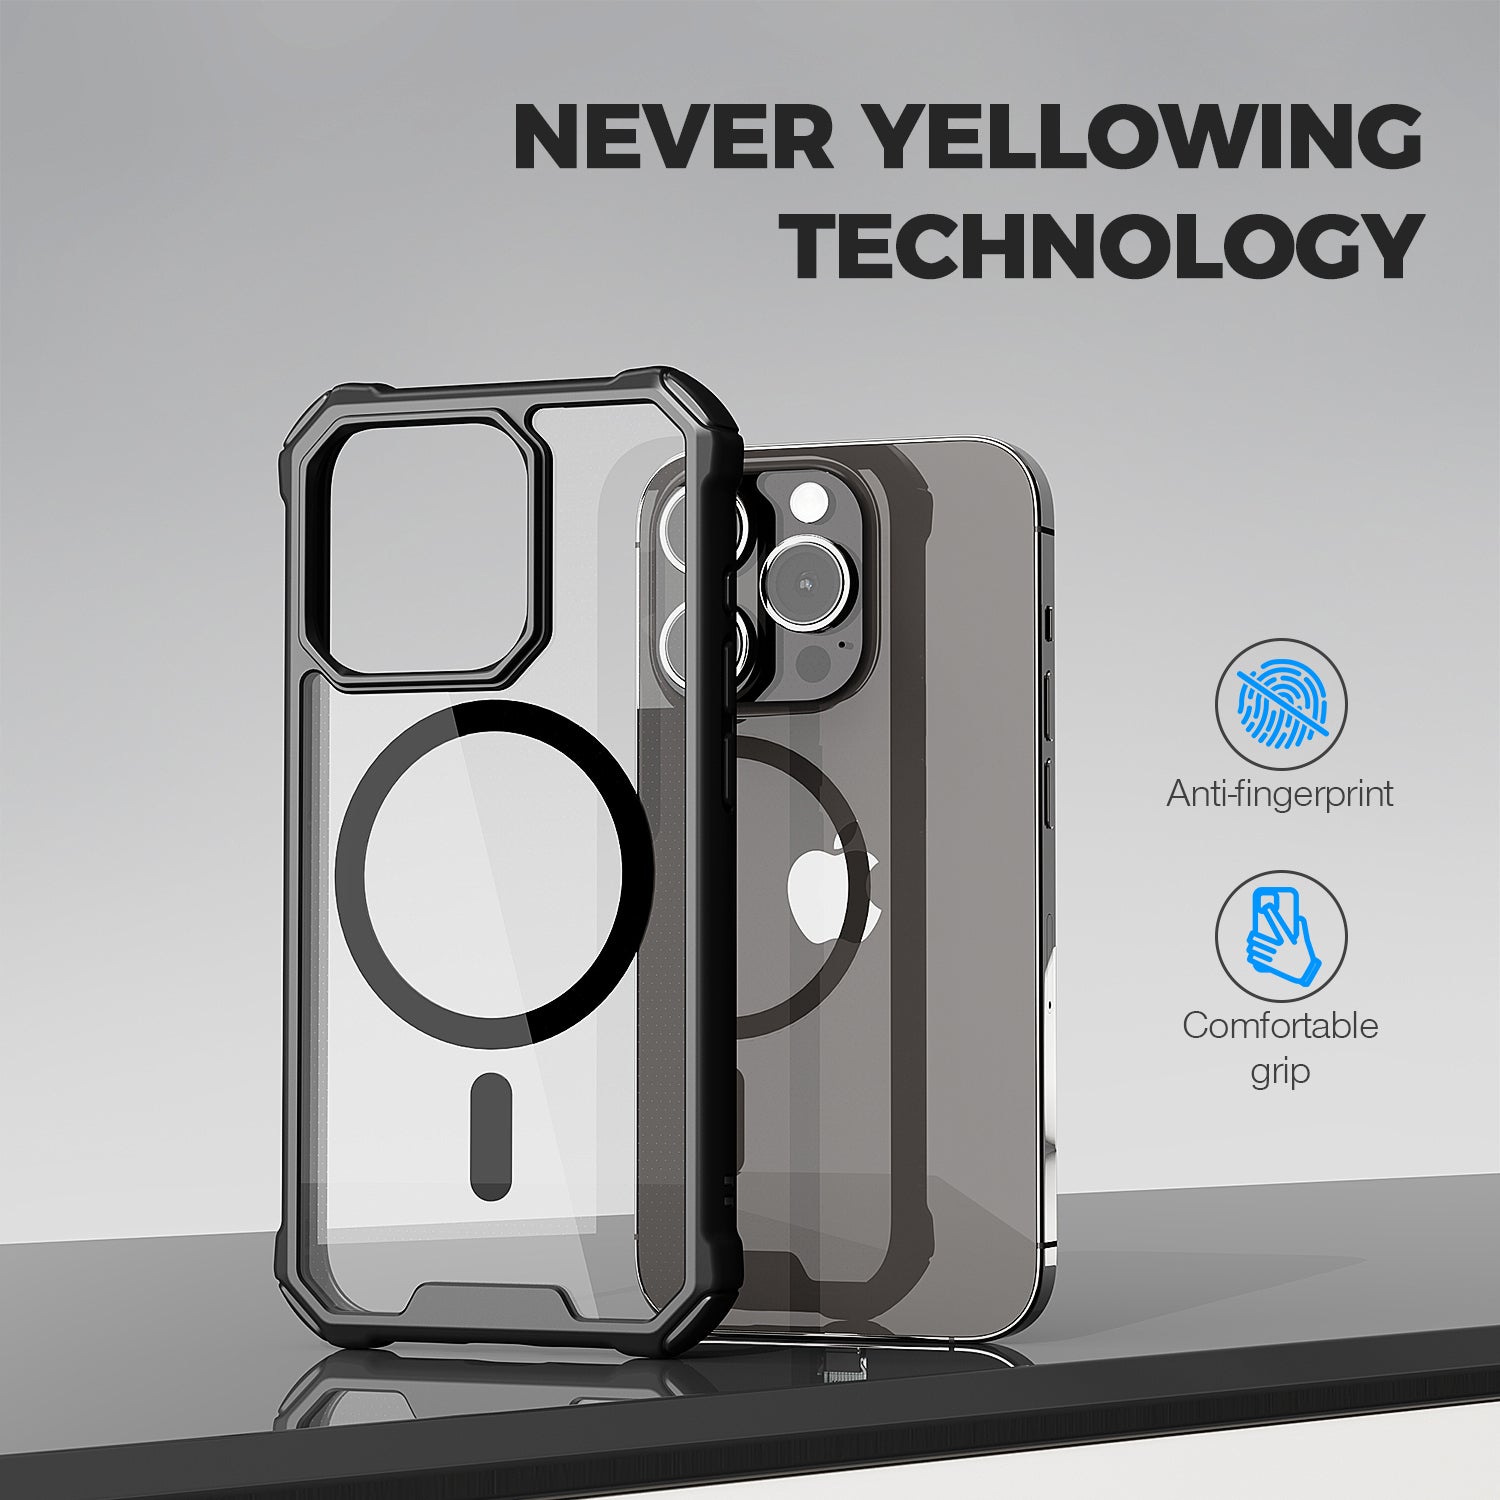 Clear Tough MagSafe Case displayed next to a smartphone, highlighting the Raptic anti-yellowing technology, anti-fingerprint, comfortable grip features, and polycarbonate construction.